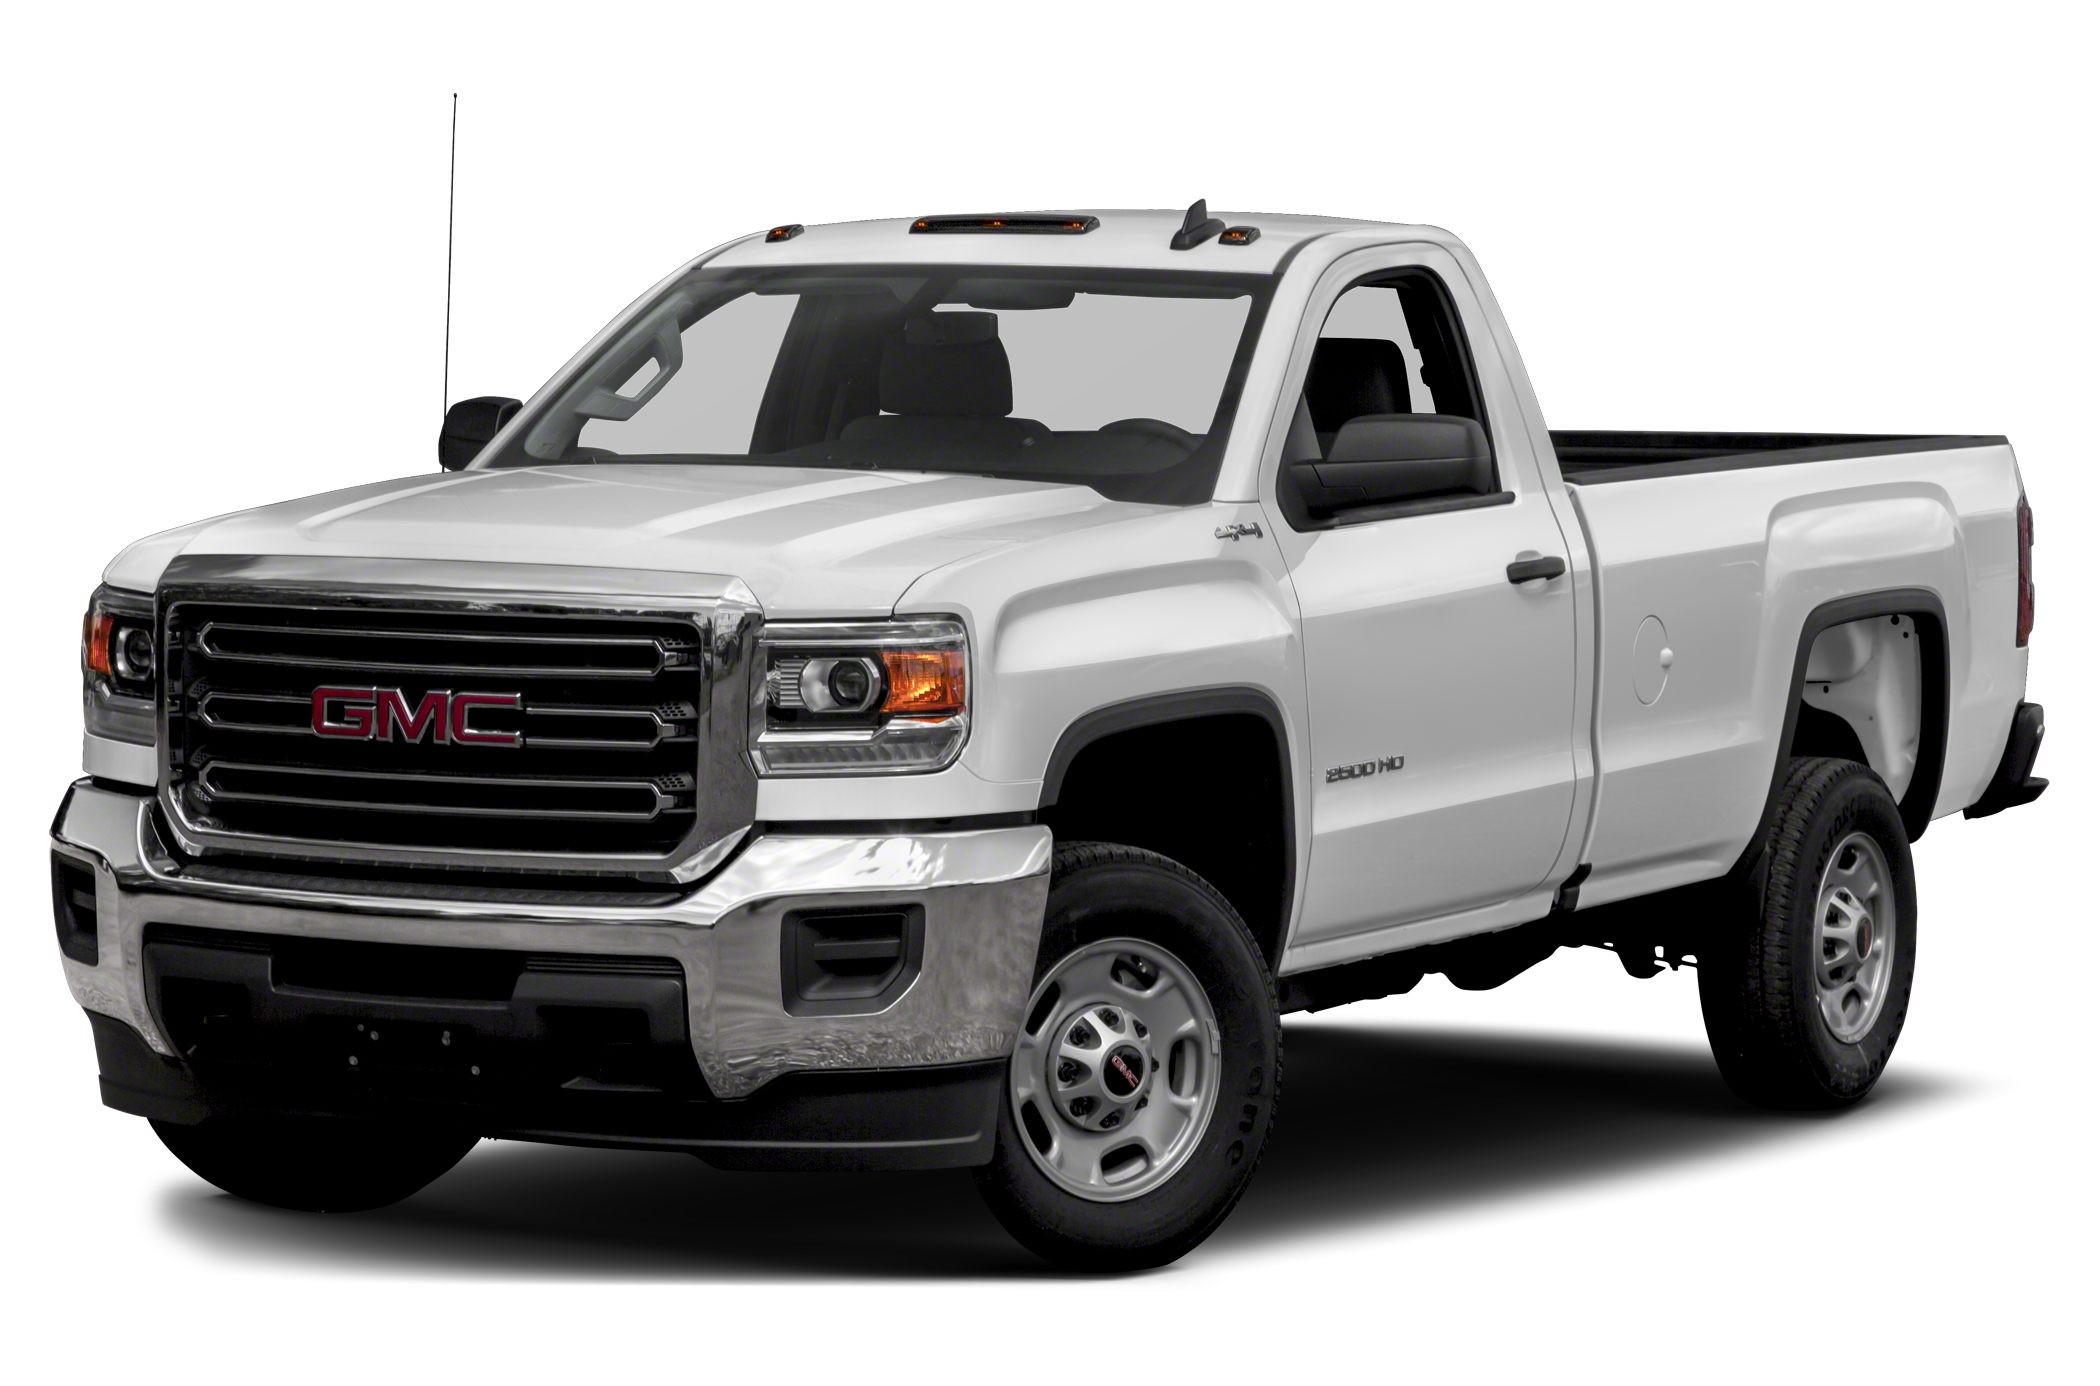 2015 Gmc Sierra 2500hd Base 4x2 Regular Cab 8 Ft Box 133 6 In Wb Pictures